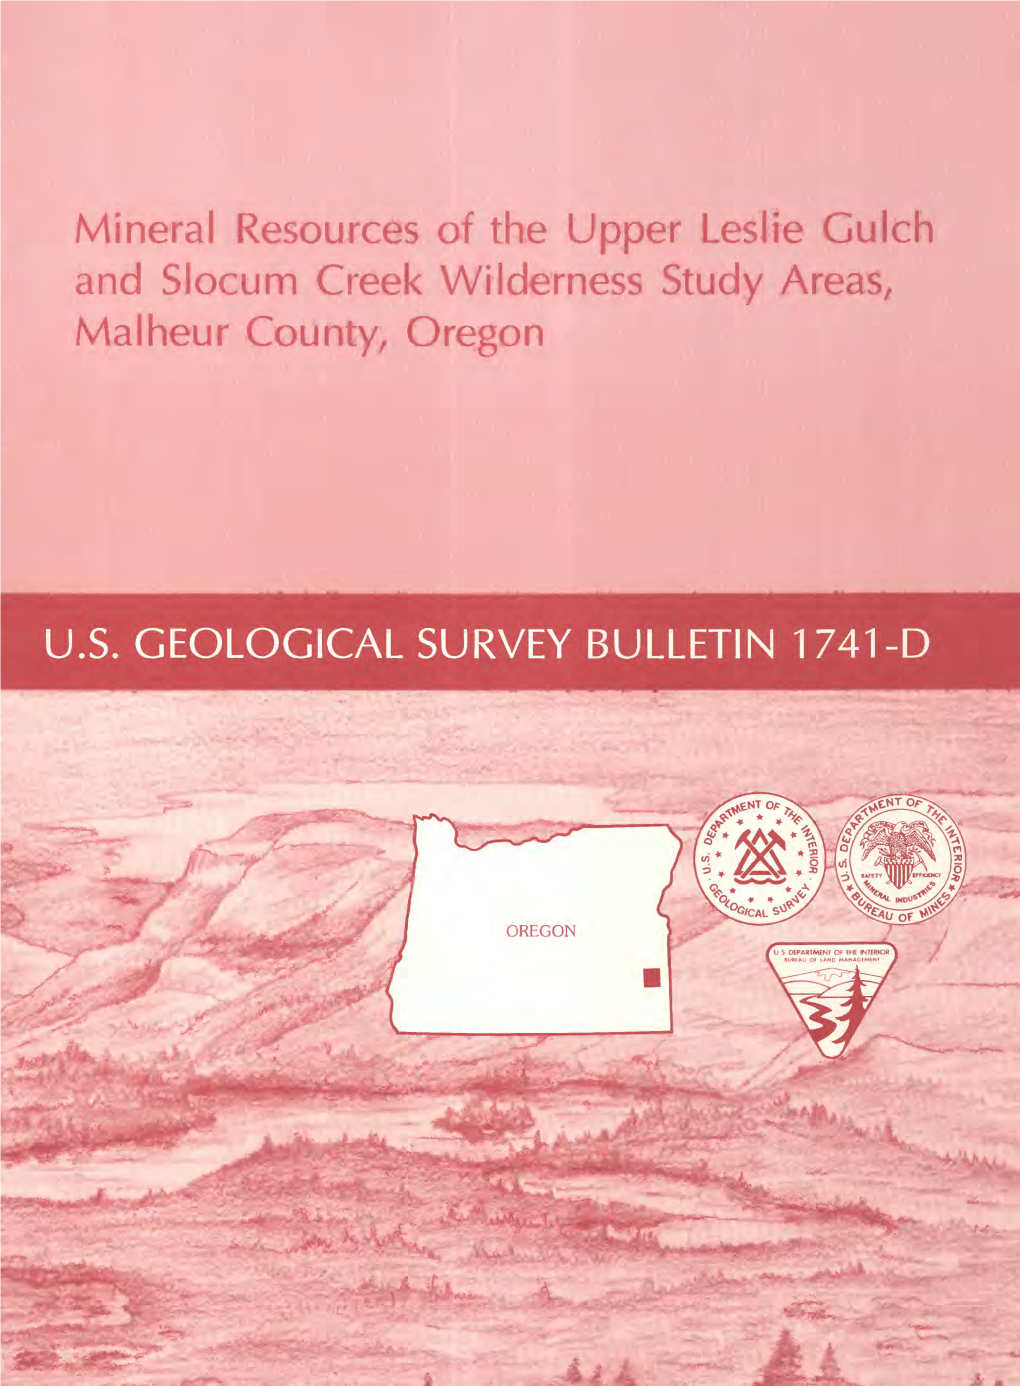 Mineral Resources of the Upper Leslie Gulch and Slocum Creek Wilderness Study Areas, Malheur County, Oregon